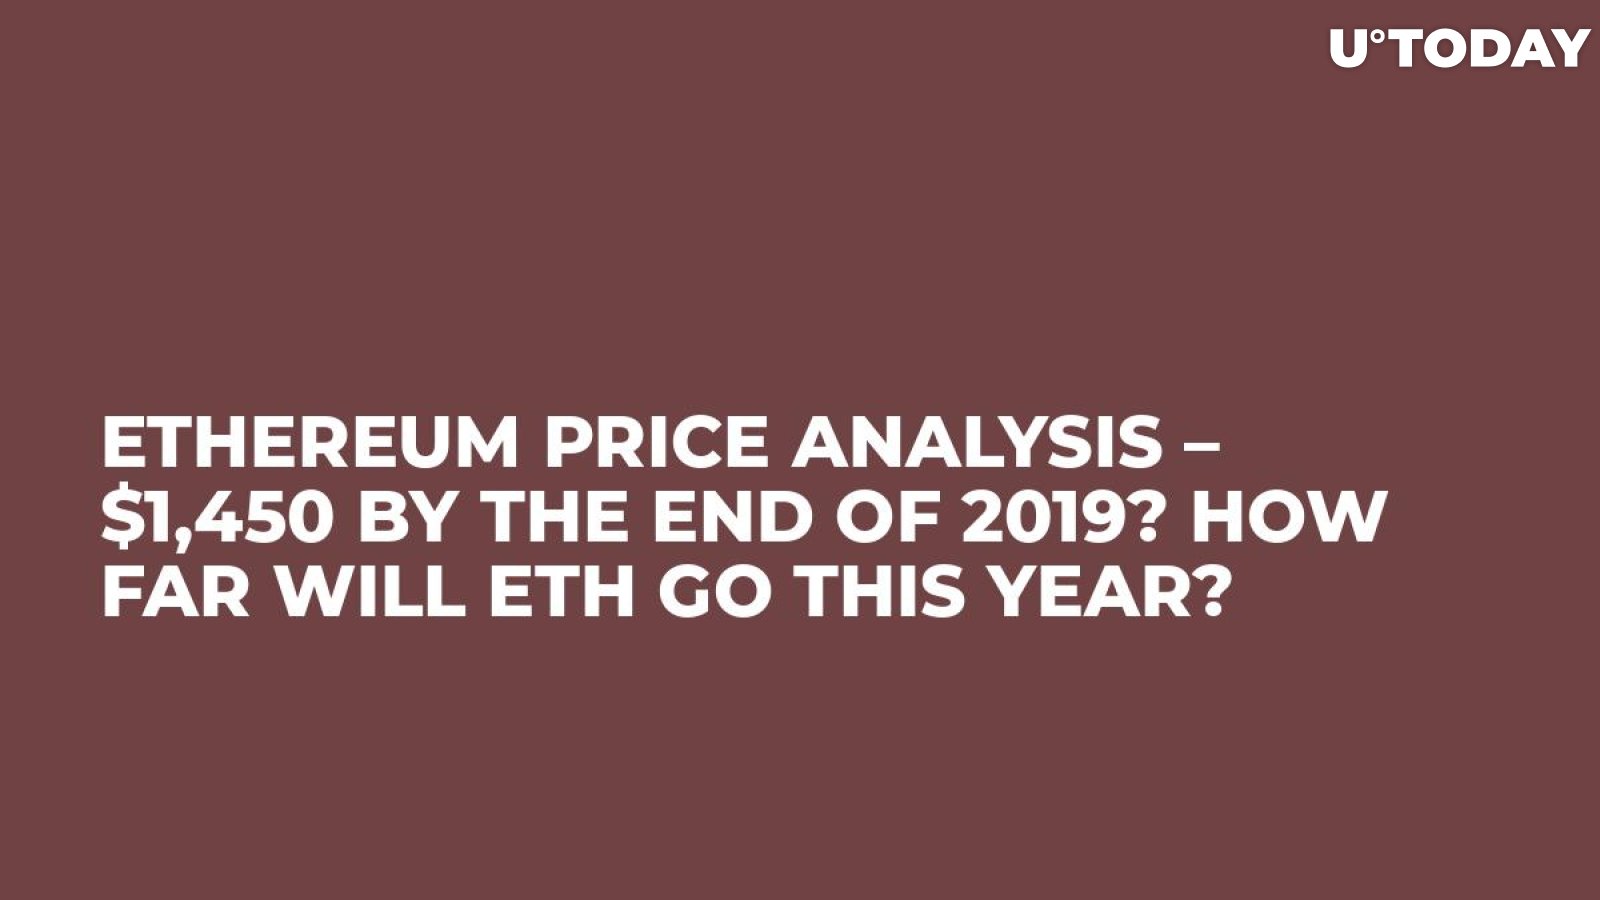 Ethereum Price Analysis – $1,450 by the End of 2019? How Far Will ETH Go This Year?